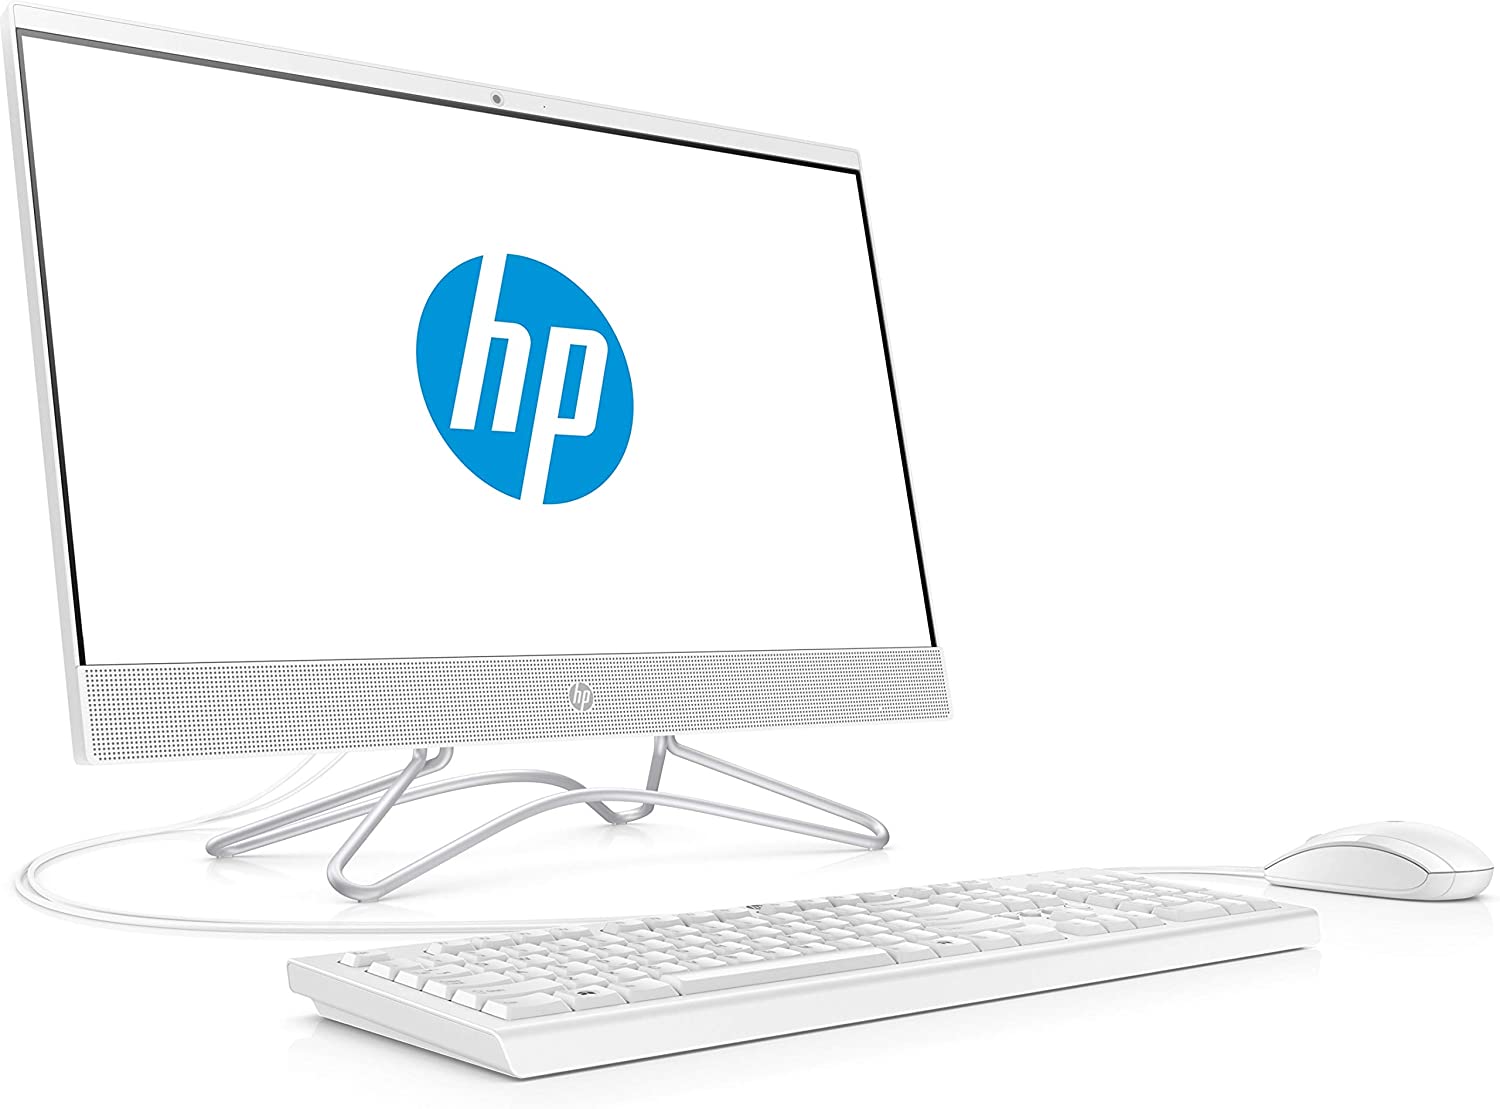 HP 24 -f0792ng 2.2GHz i3-8130U 8th Generation Intel® Core ™ i3 23.8 "1920 x 1080Pixel White All-in-one PC